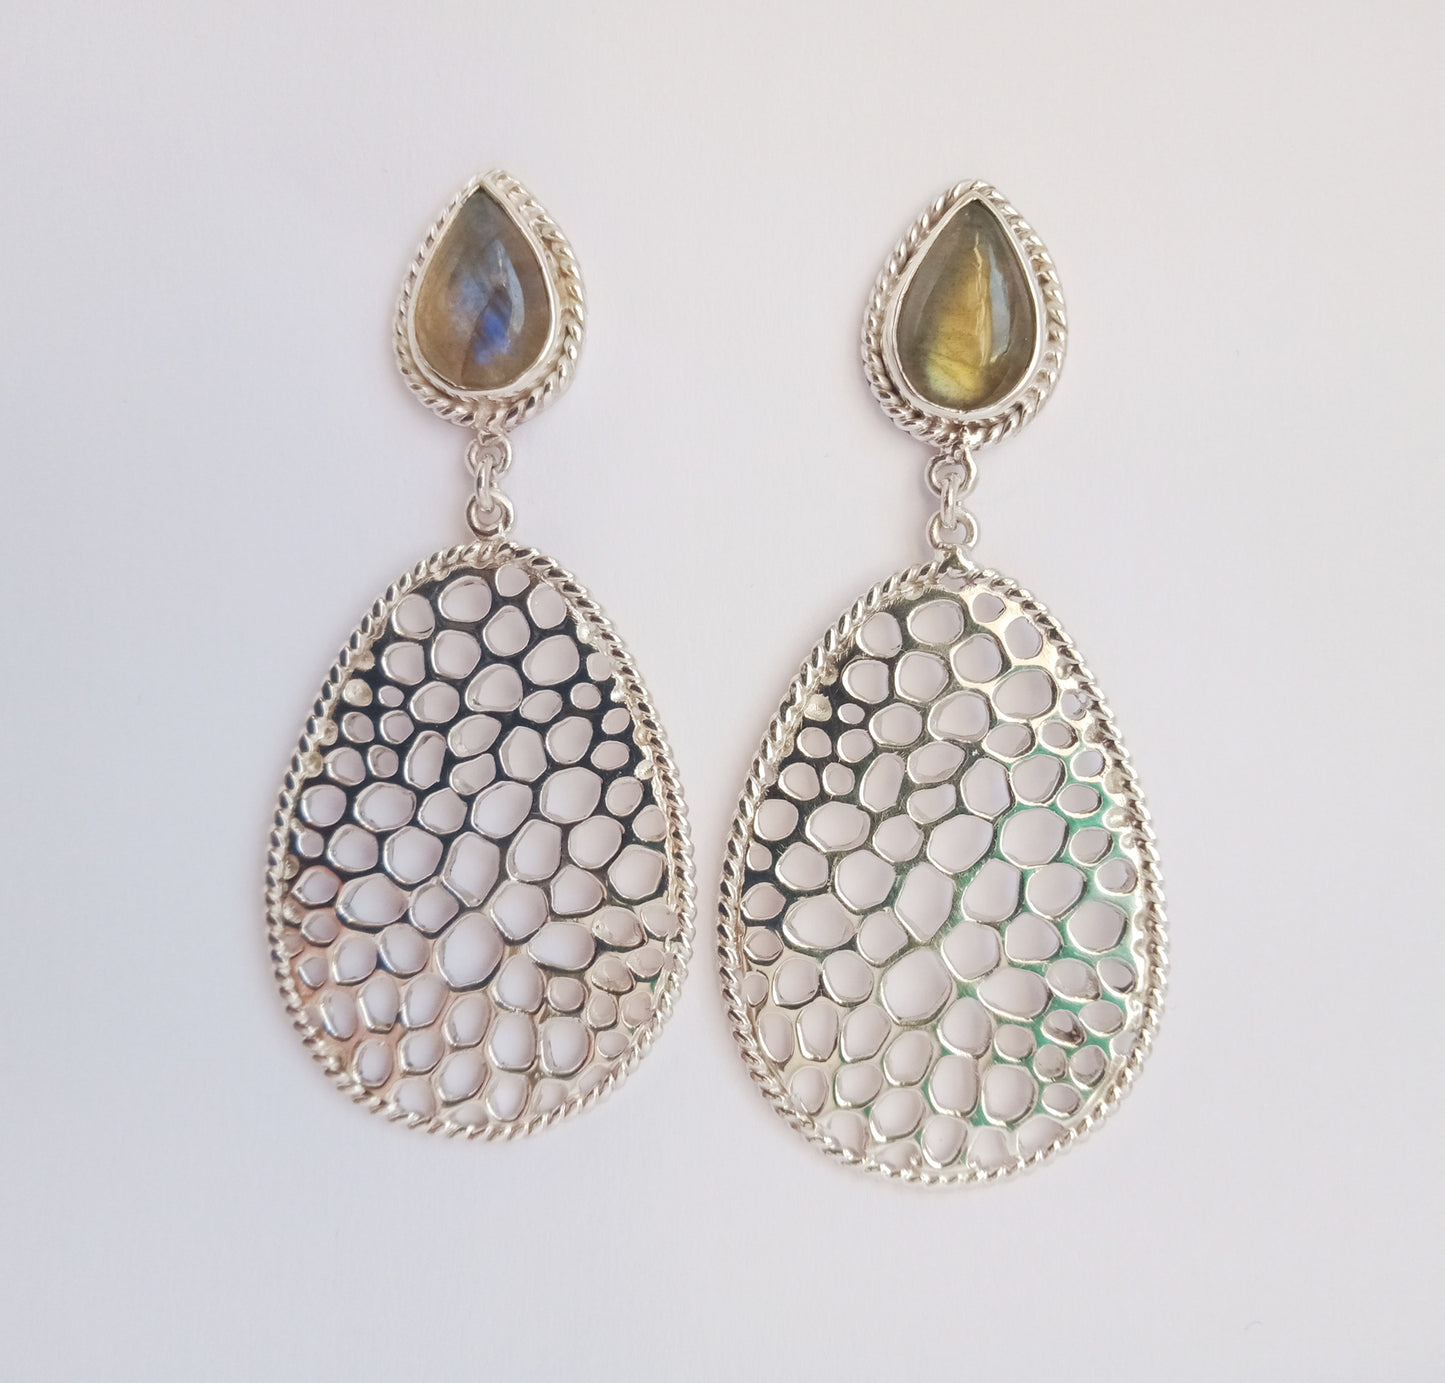 Labyrinth Labradorite Drops in Sterling Silver 925